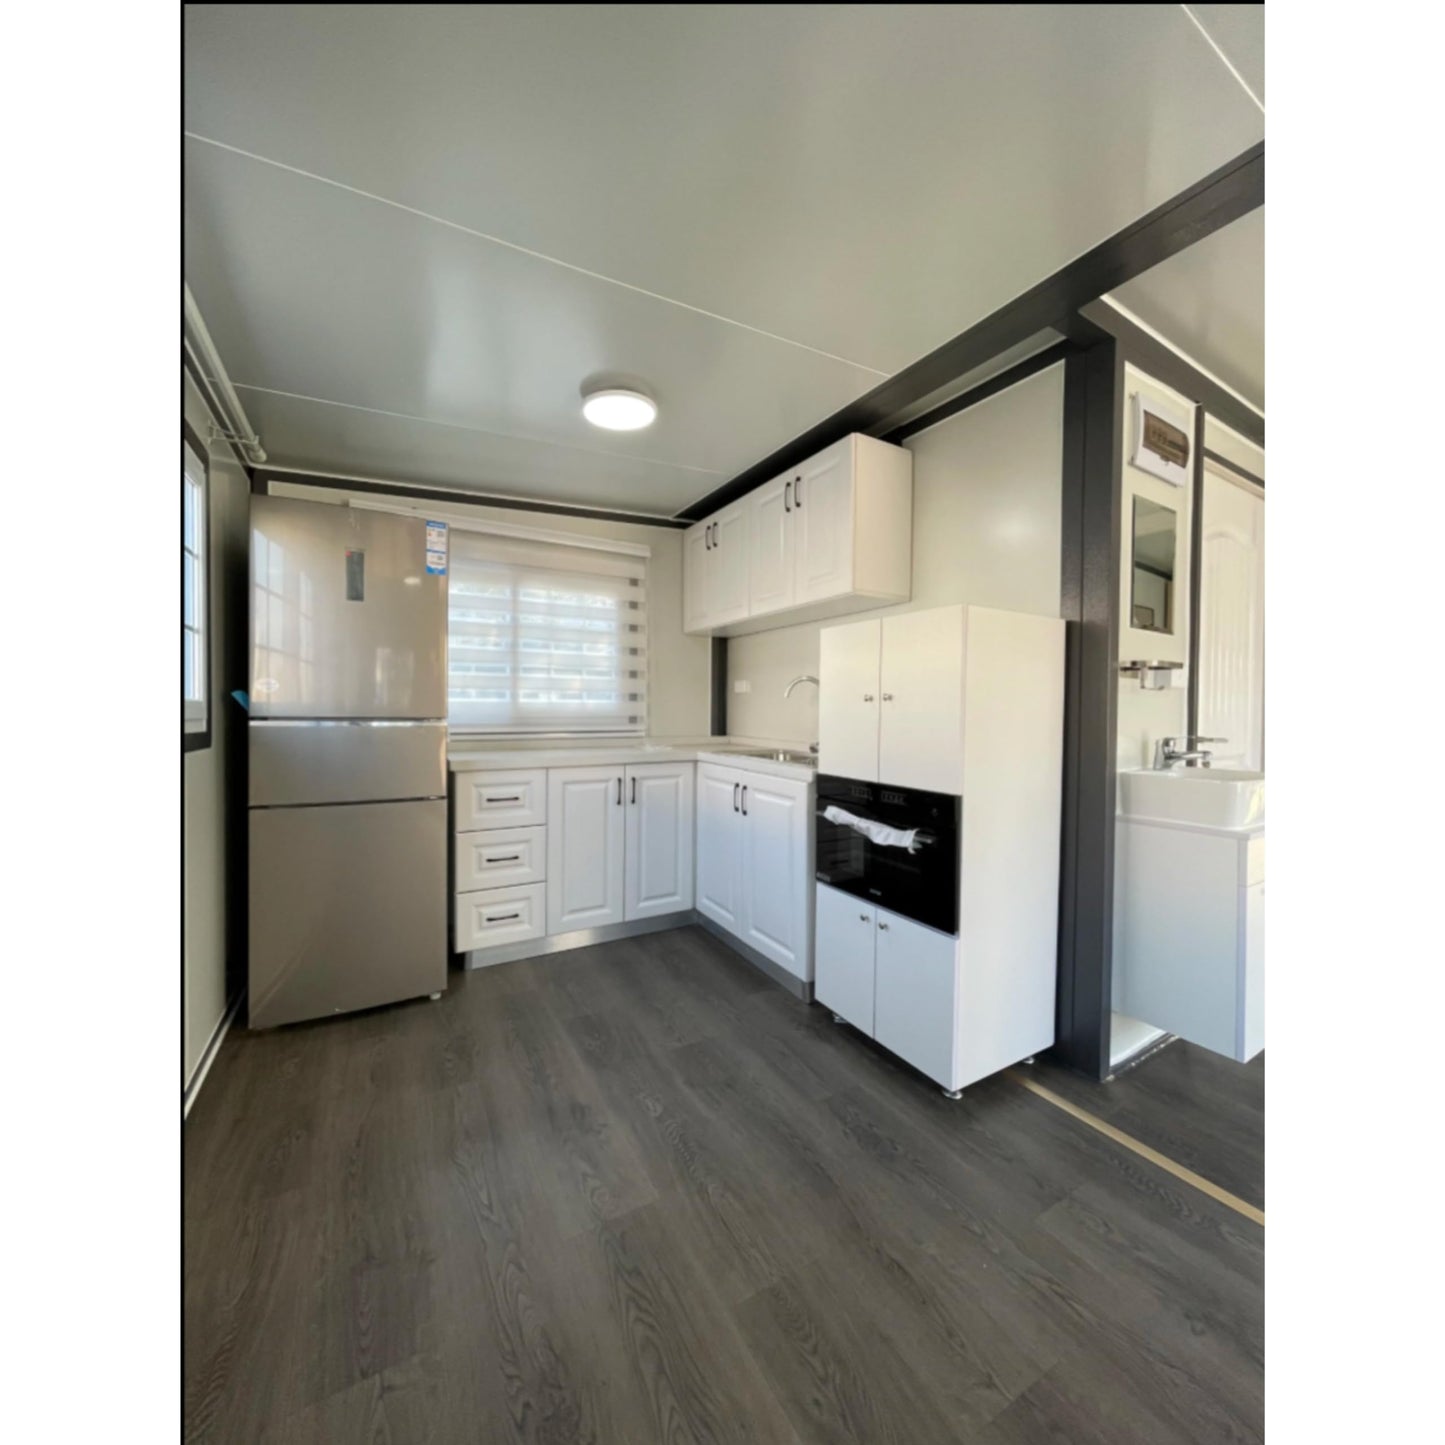 Mobile House, Mobile Home, Portable House, Prefab Expandable House 19ft x 20ft -Perfect for On-The-Go Living! [Your Homies]